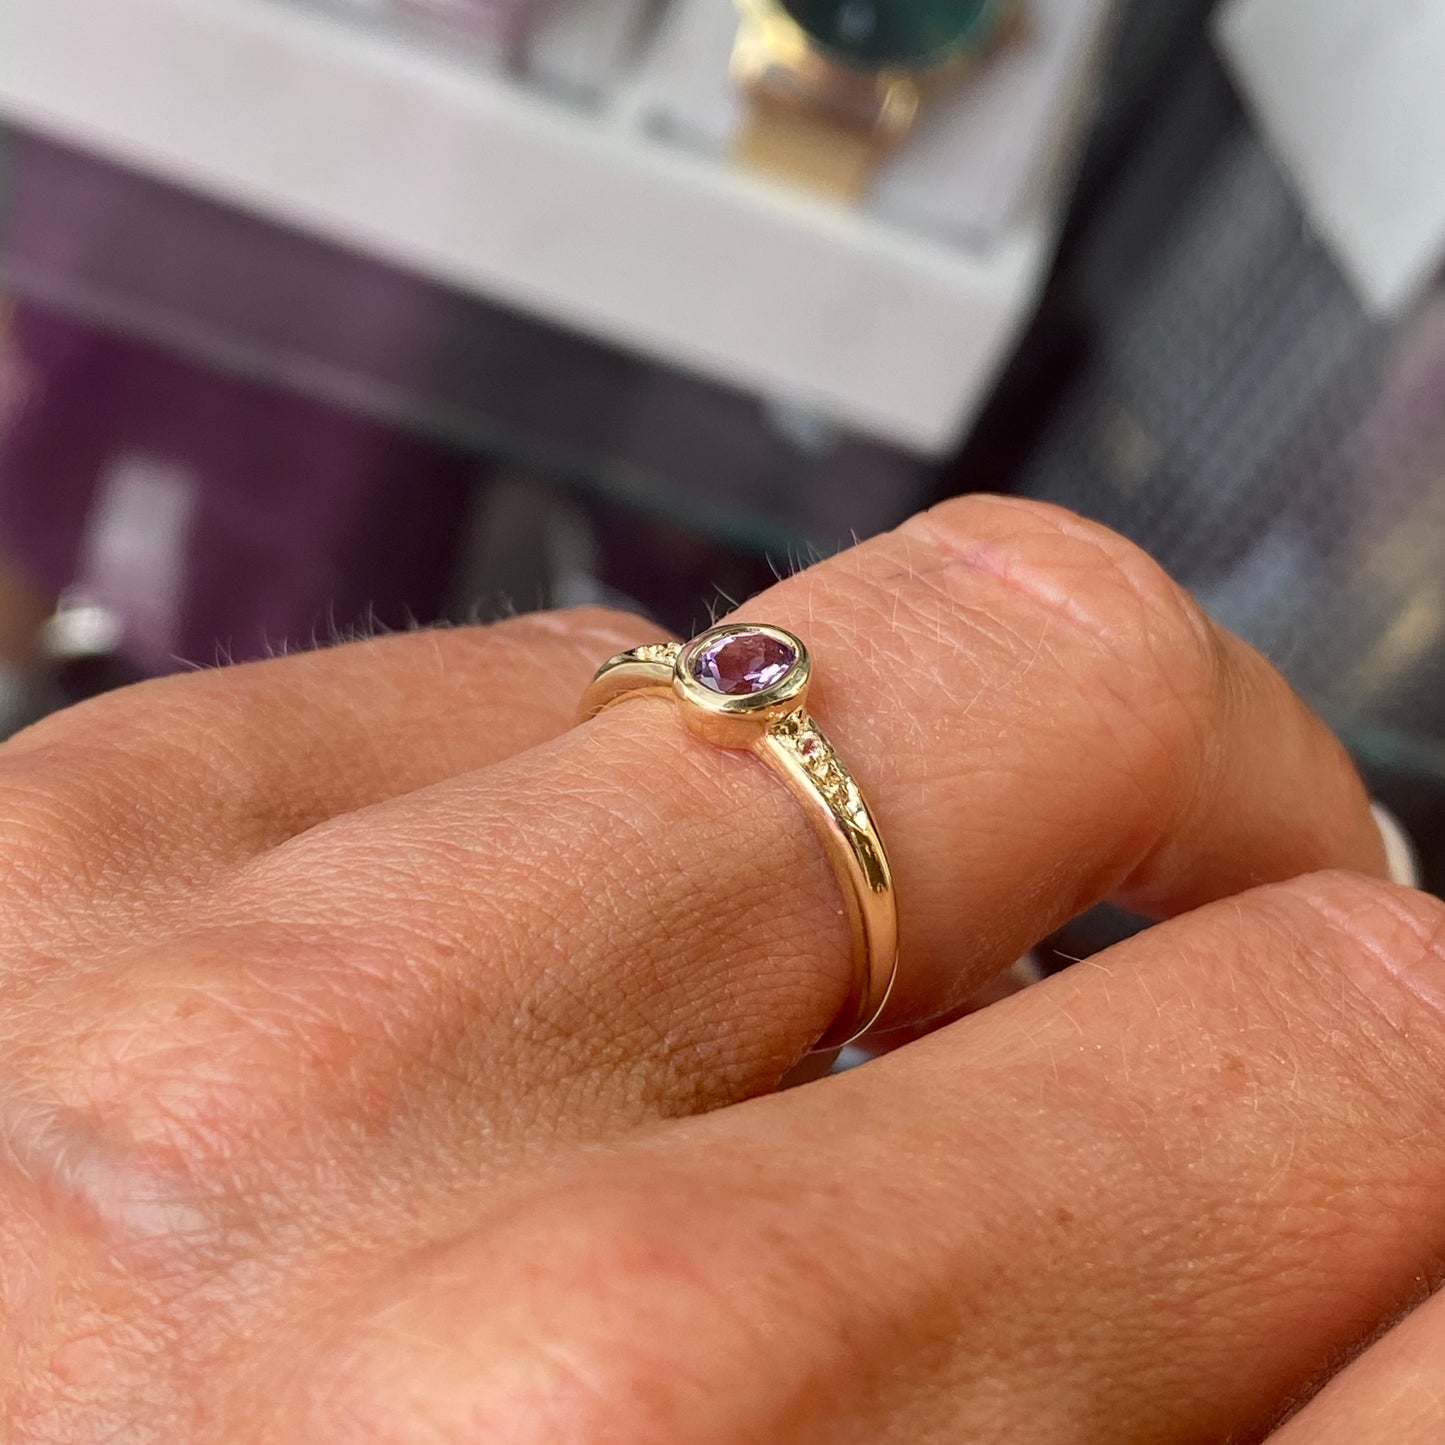 9ct Gold Oval Solitaire Ring - Amethyst & White Topaz - John Ross Jewellers